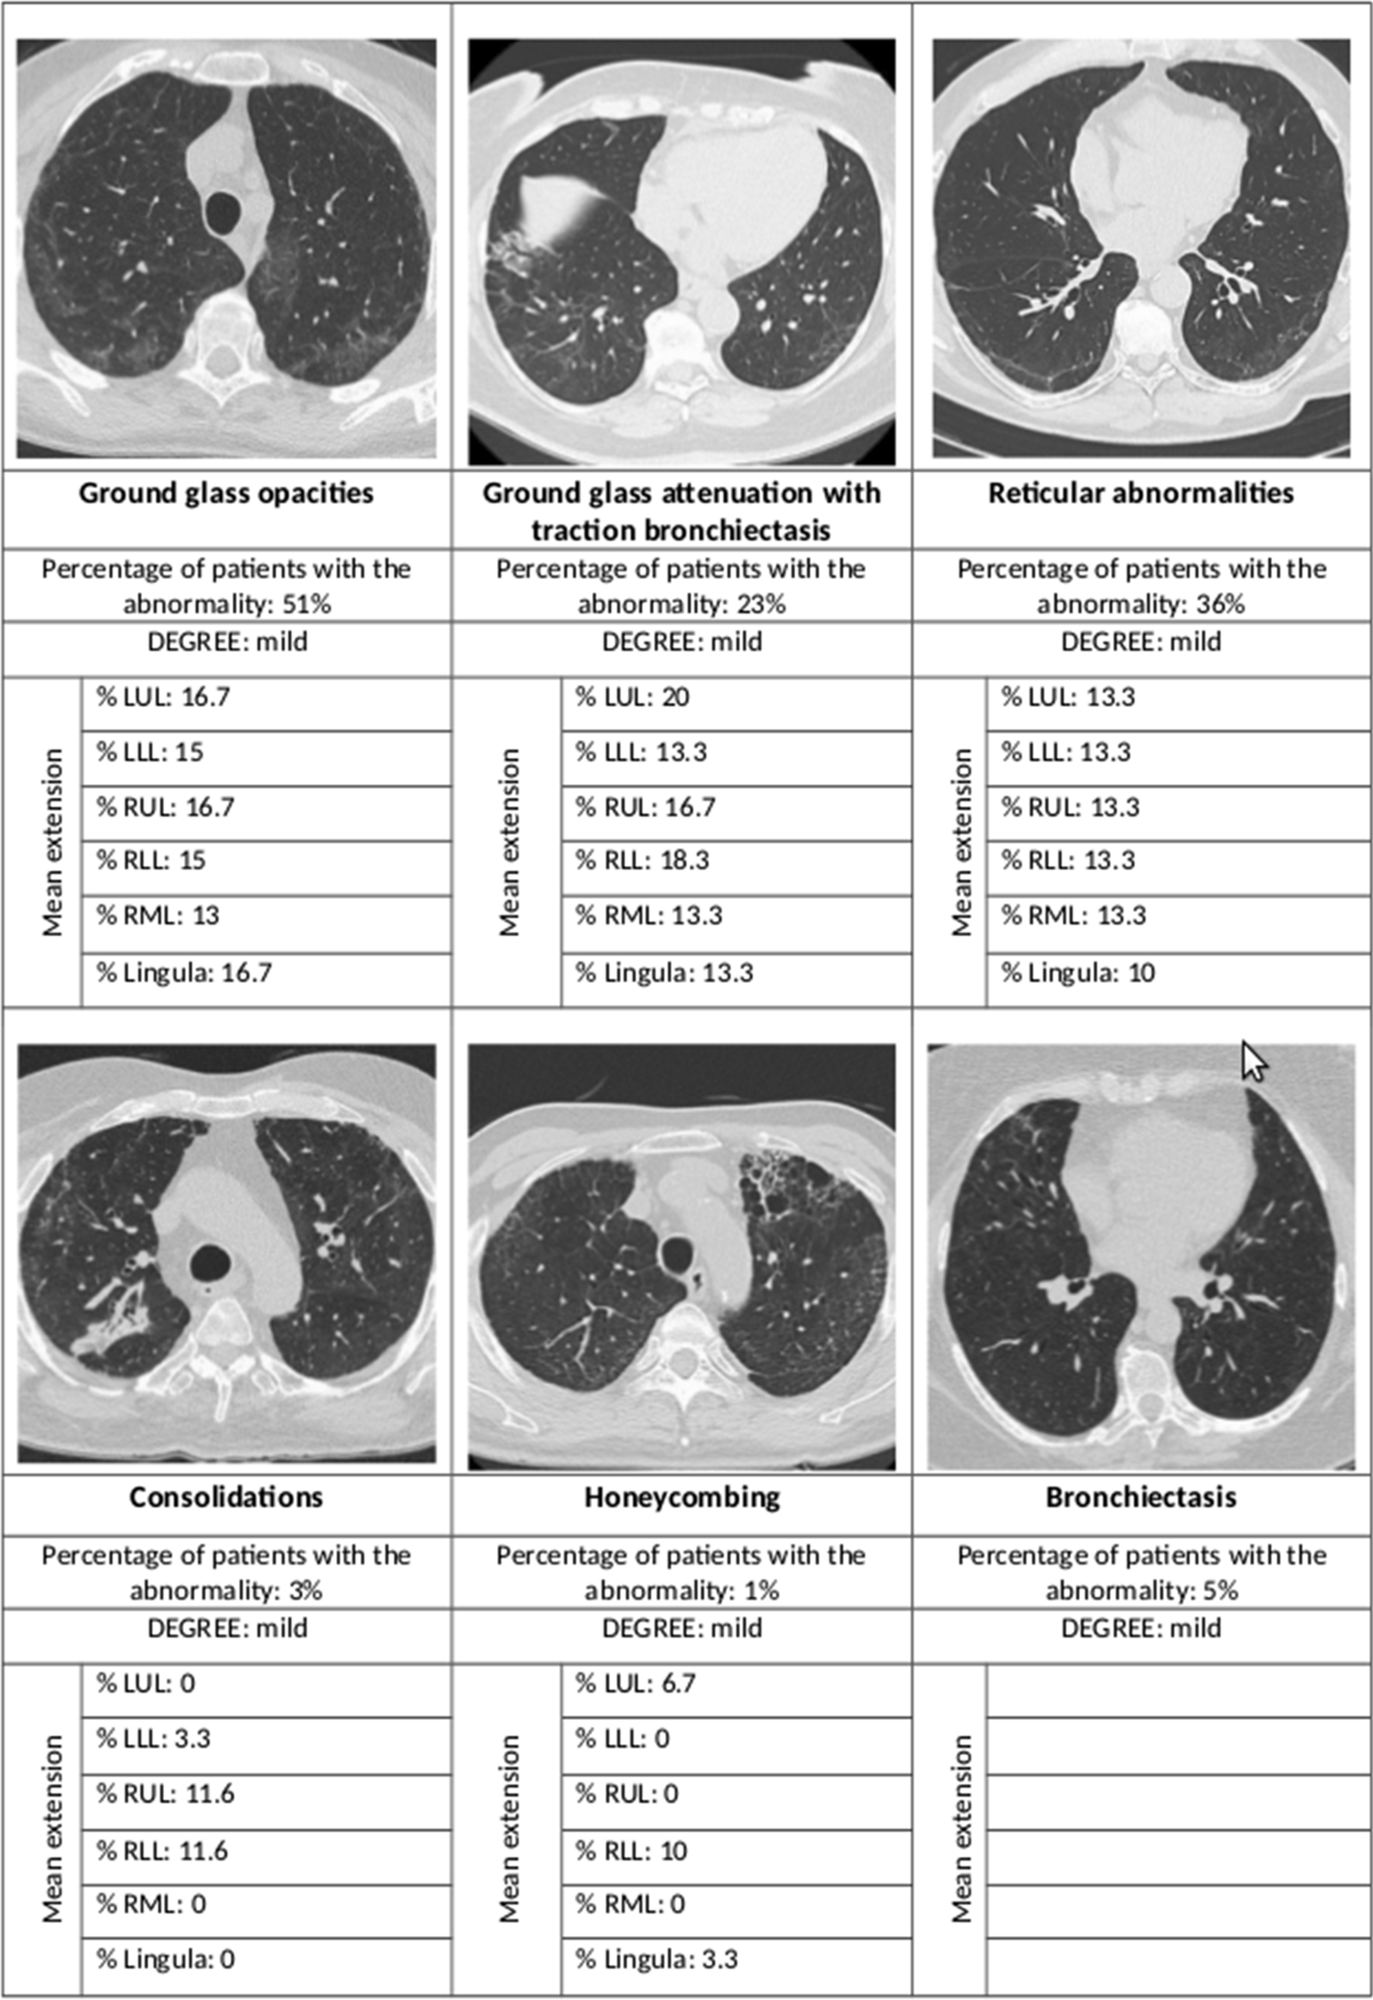 Summary of the main radiological abnormalities and their extension according to the lung lobe involved. LUL left upper lobe, LLL left lower lobe, RUL right upper lobe, RLL right lower lobe, RML right middle lobe